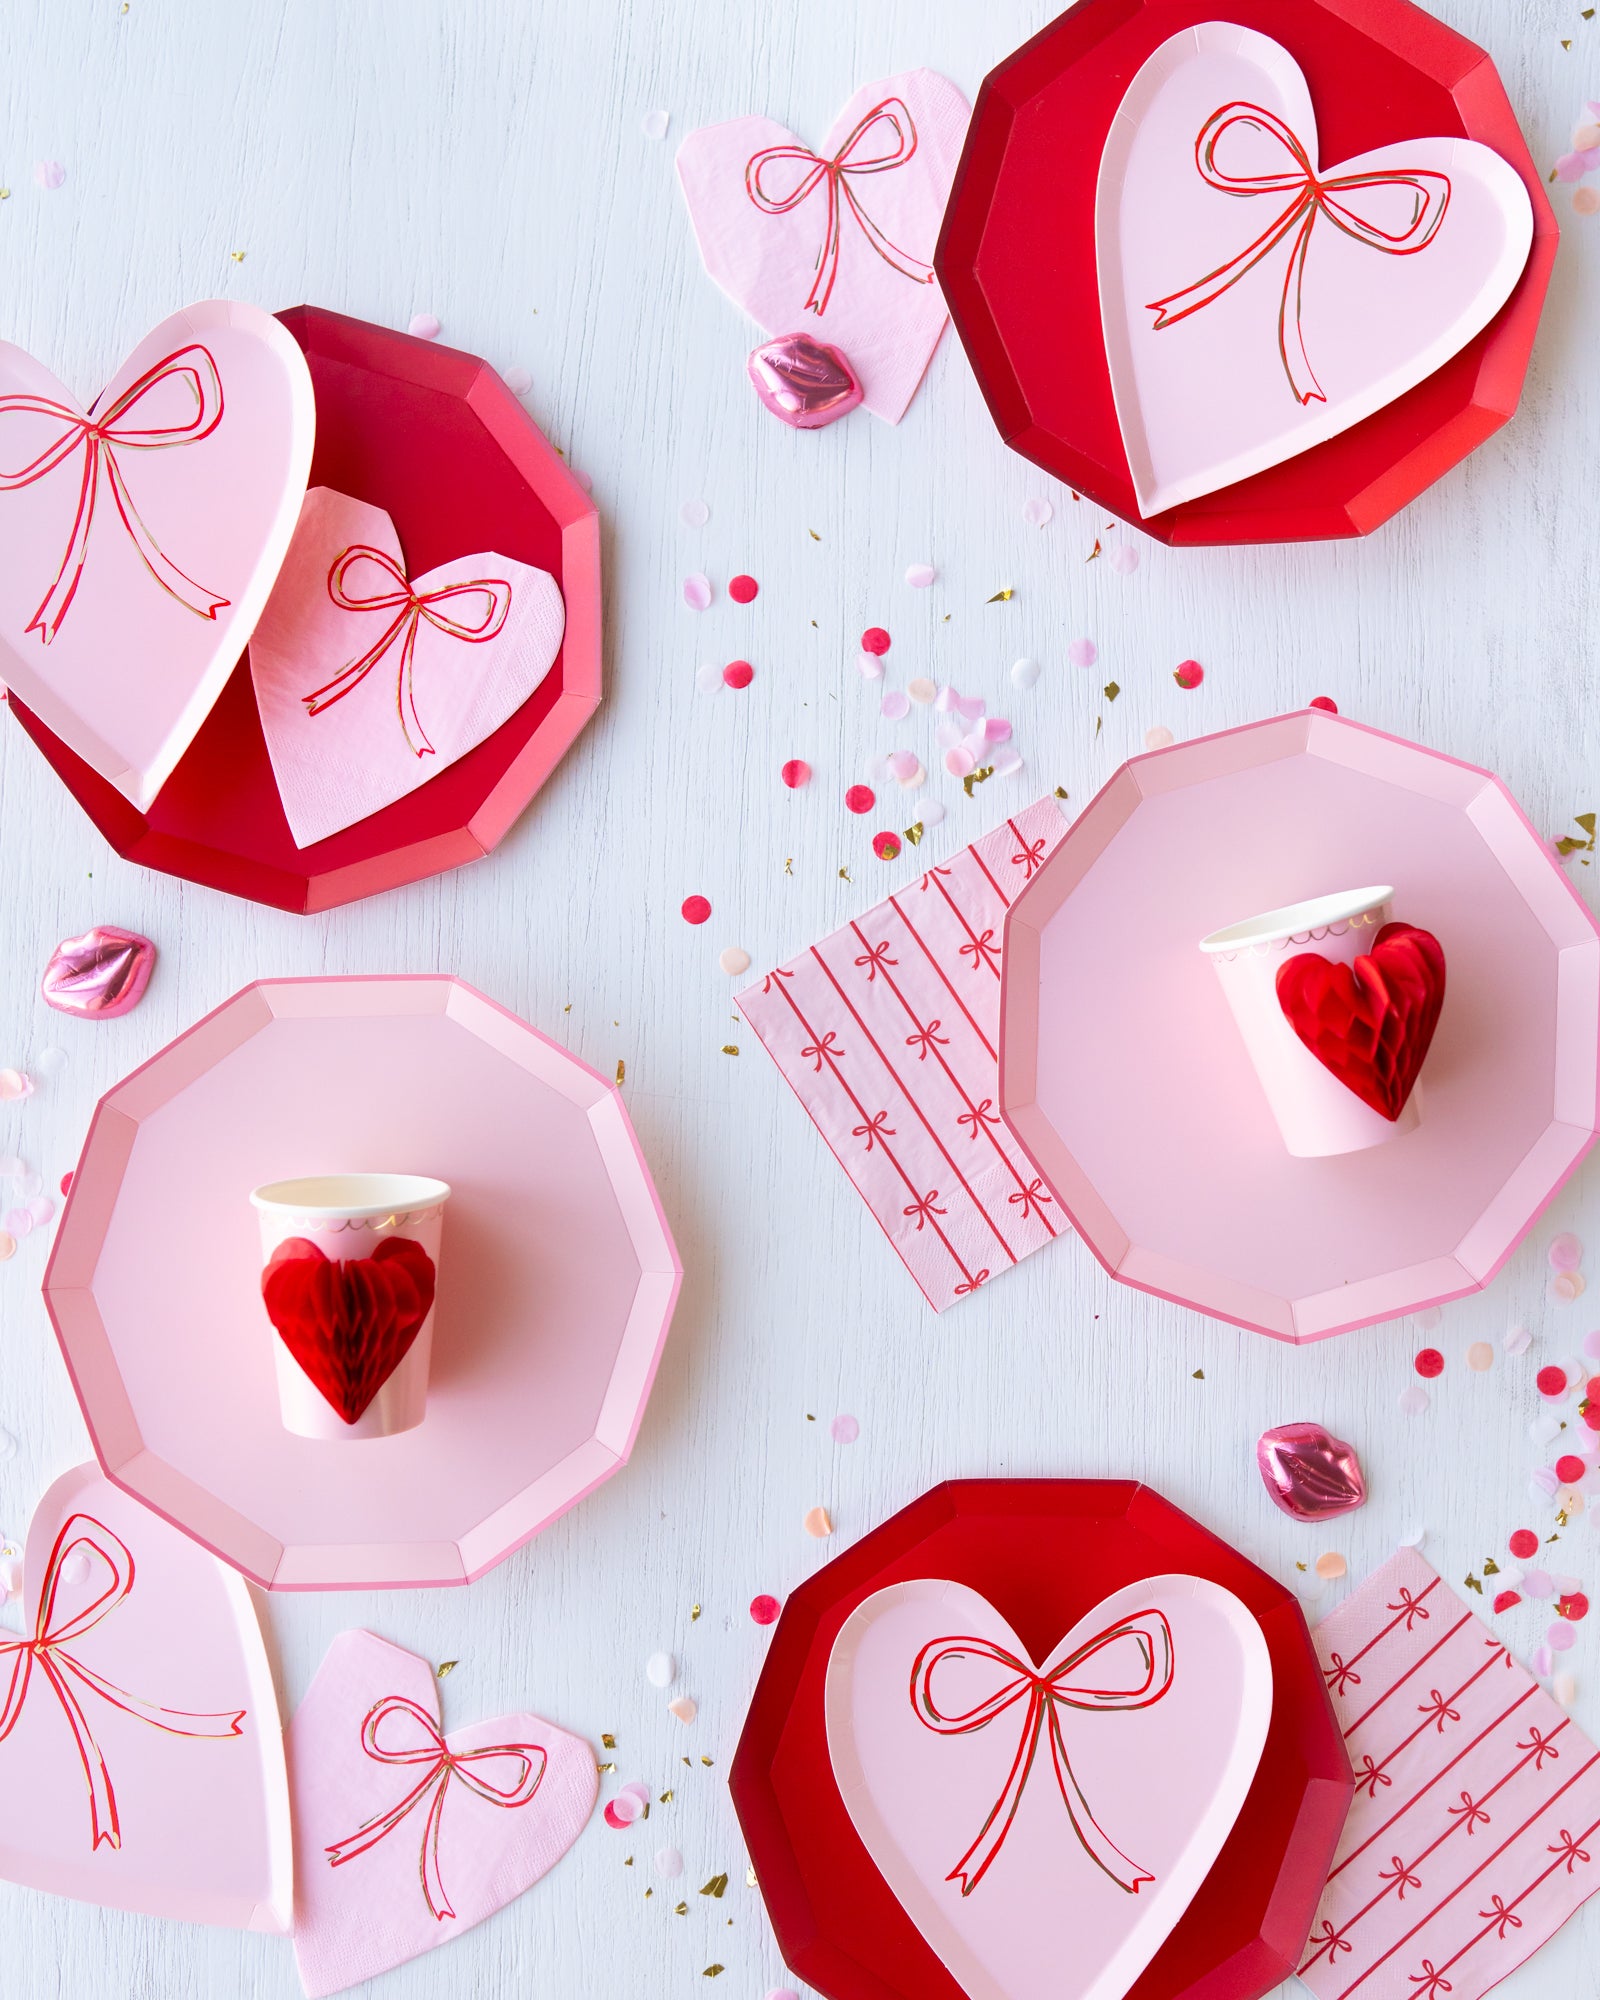 Red and pink Valentine's Day party supplies